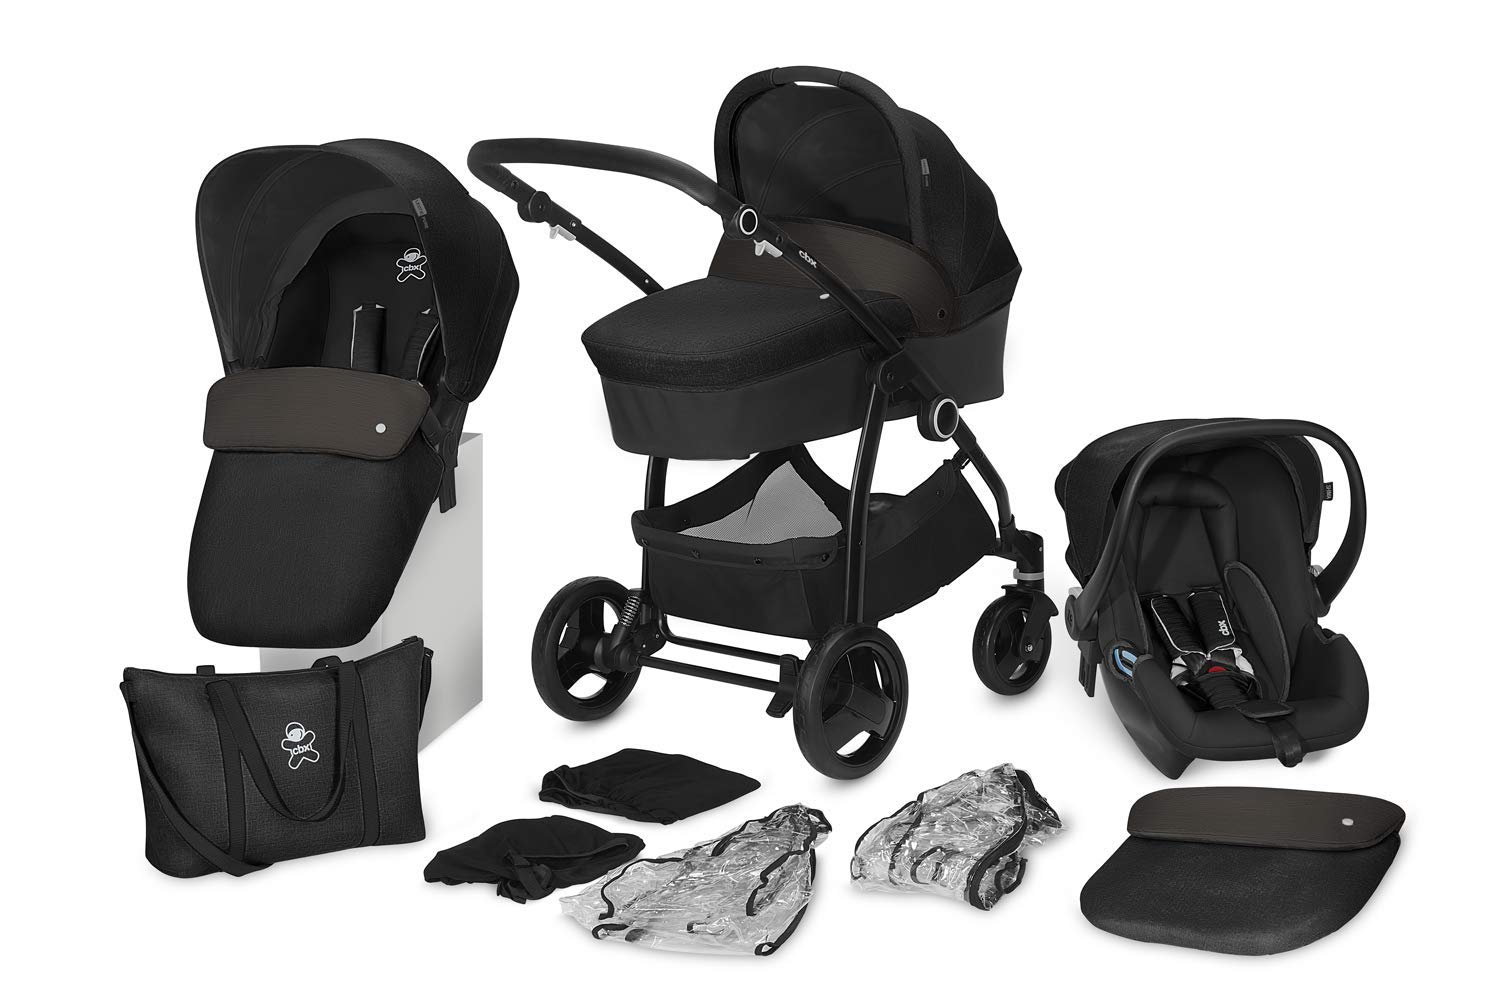 cbx 3-in-1 Leotie Pure 12-Piece Combi Pushchair Set with Shima Baby Seat, Reversible Seat Unit, Folding Baby Cot, 2x Rain Covers, 2x Mosquito Nets, Changing Bag, from Birth to 15 kg, Anthracite